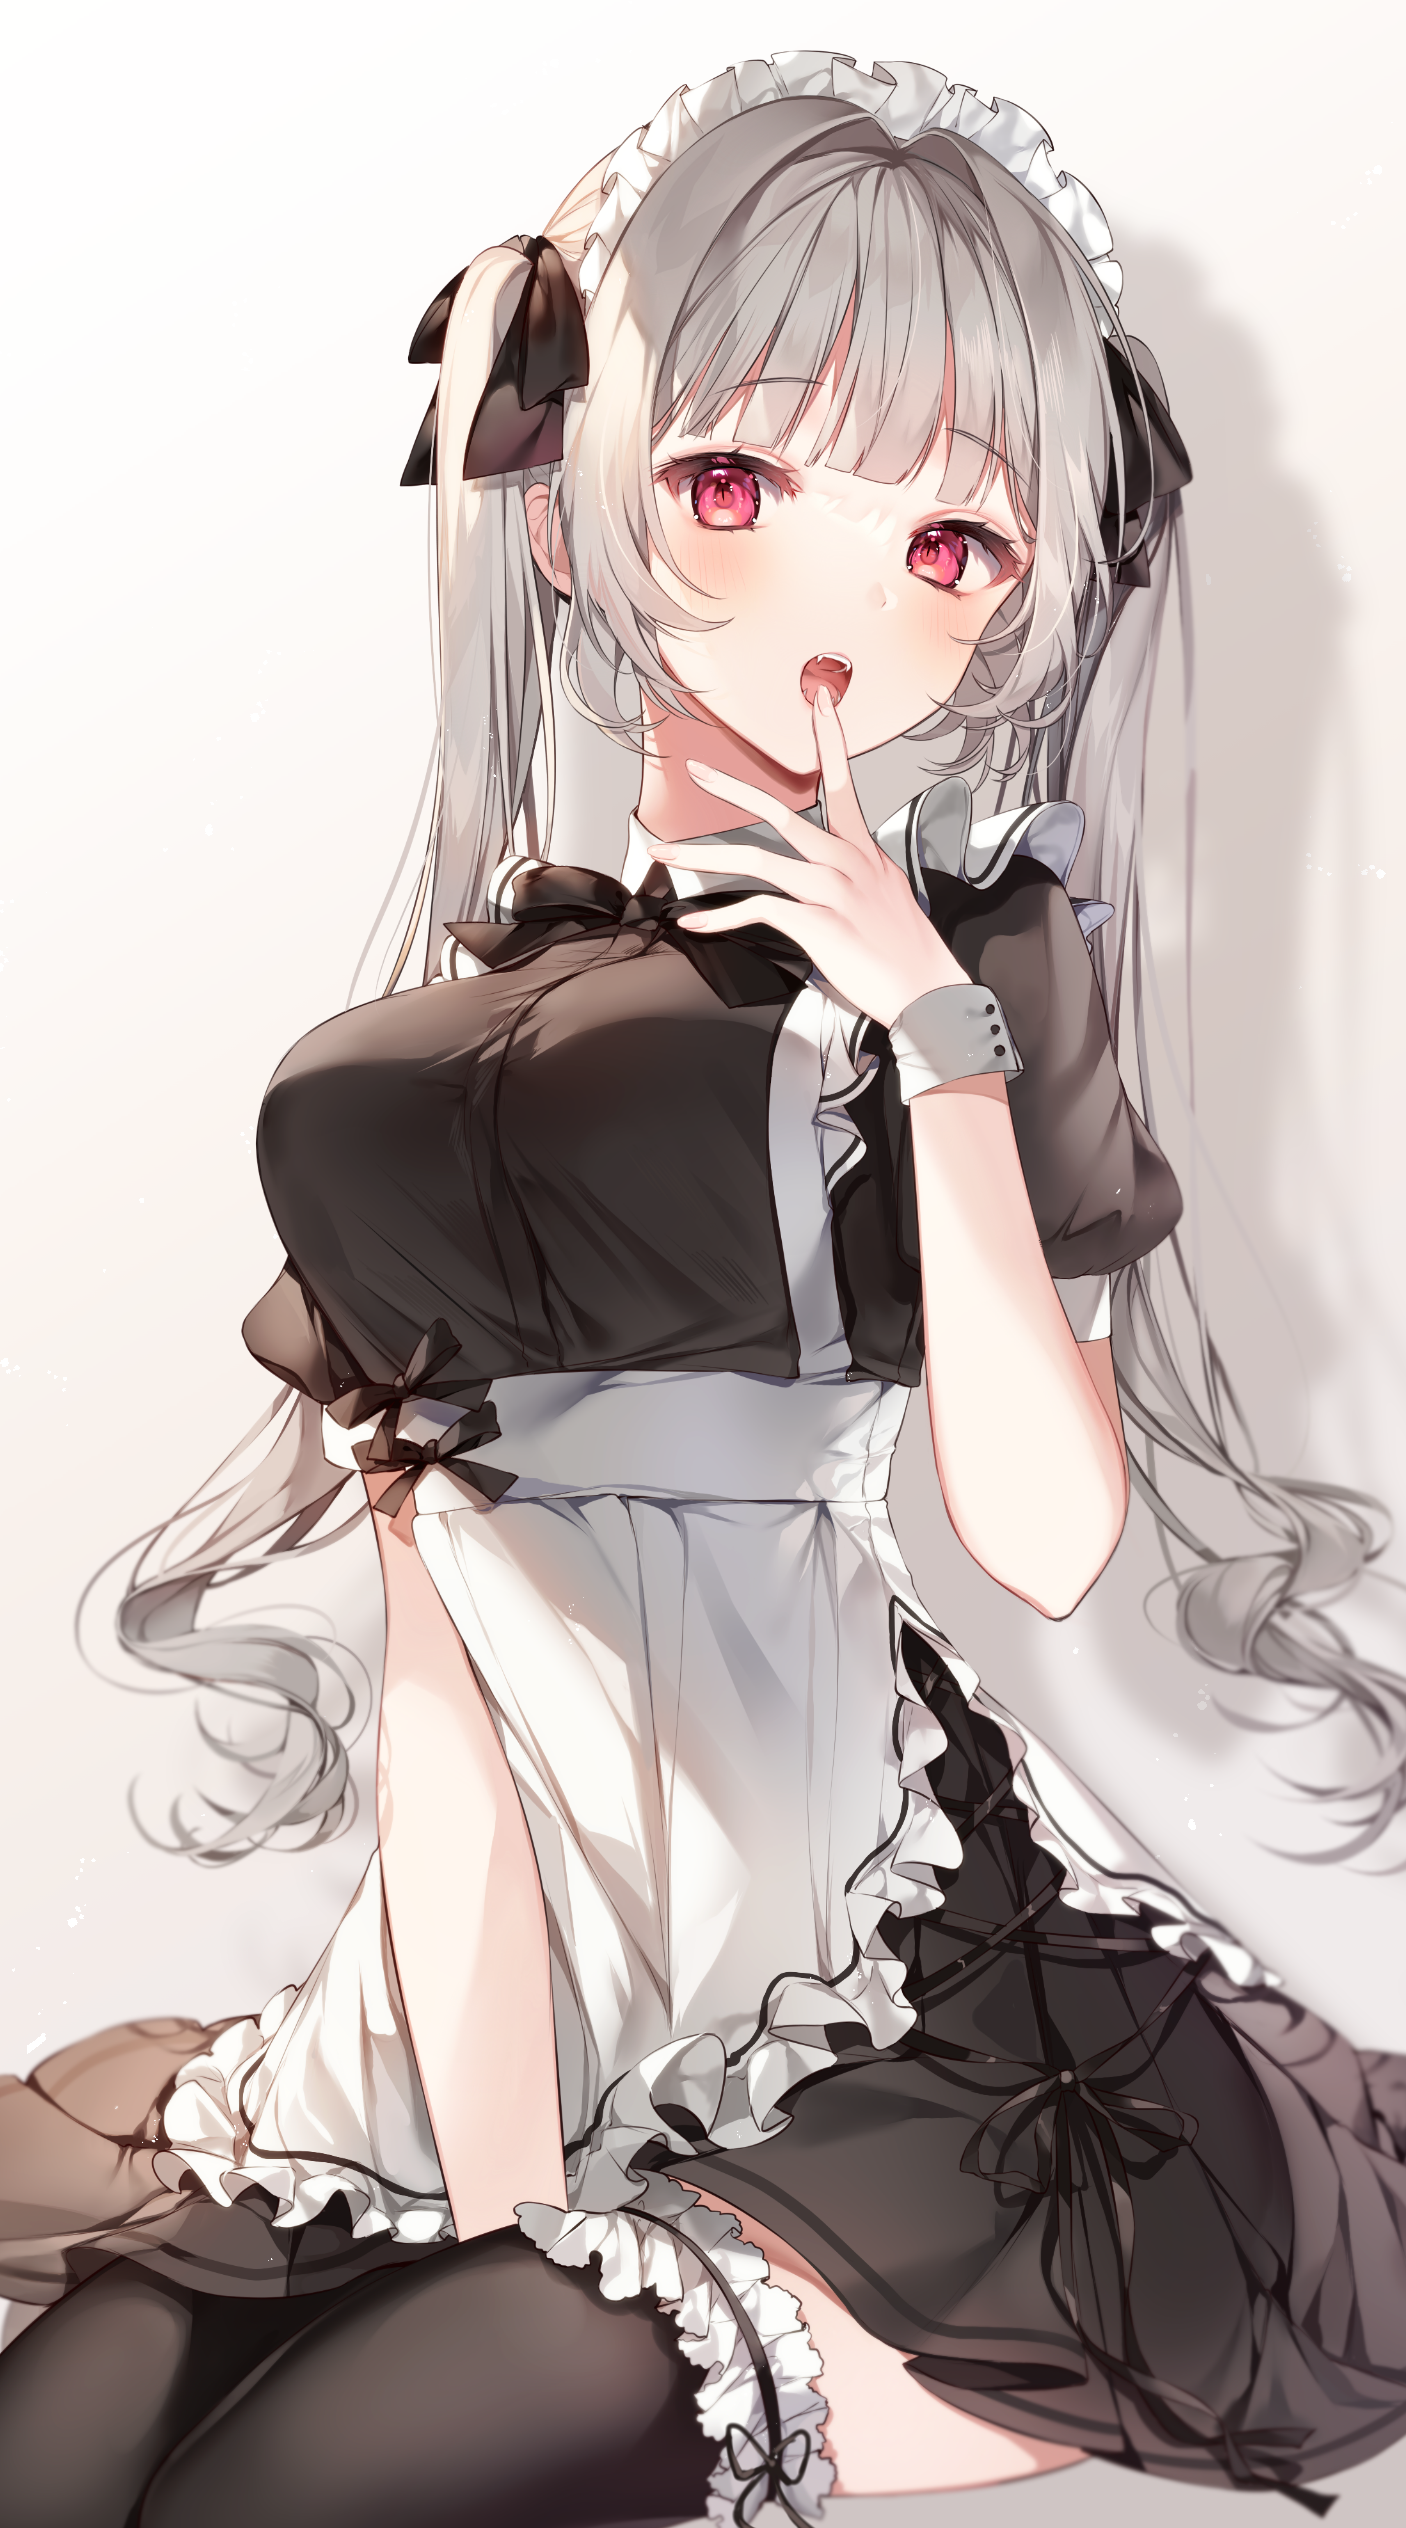 Anime Anime Girls Maid Maid Outfit Red Eyes Twintails Silver Hair Wallpaper   Resolution1406x2528  ID1354726  wallhacom